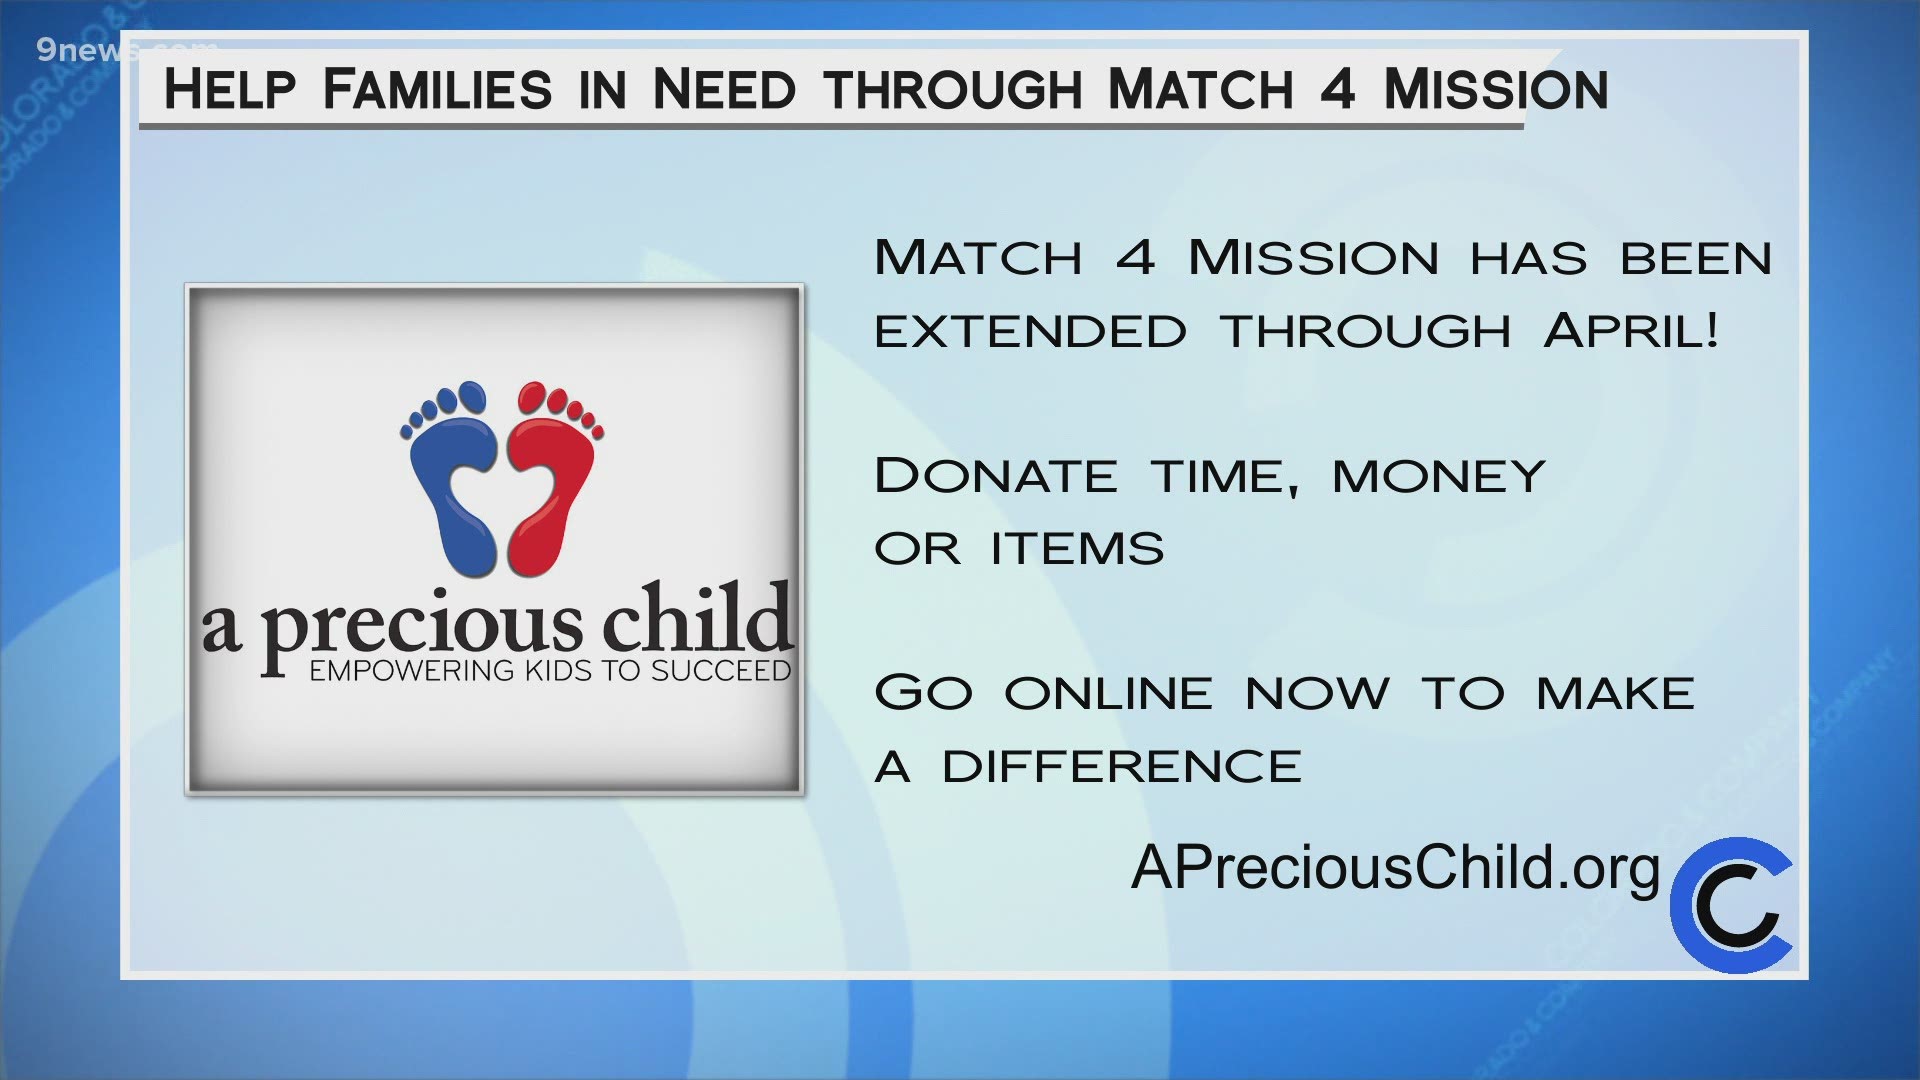 Learn more about the Match 4 Mission Campaign and donate online at APreciousChild.org.